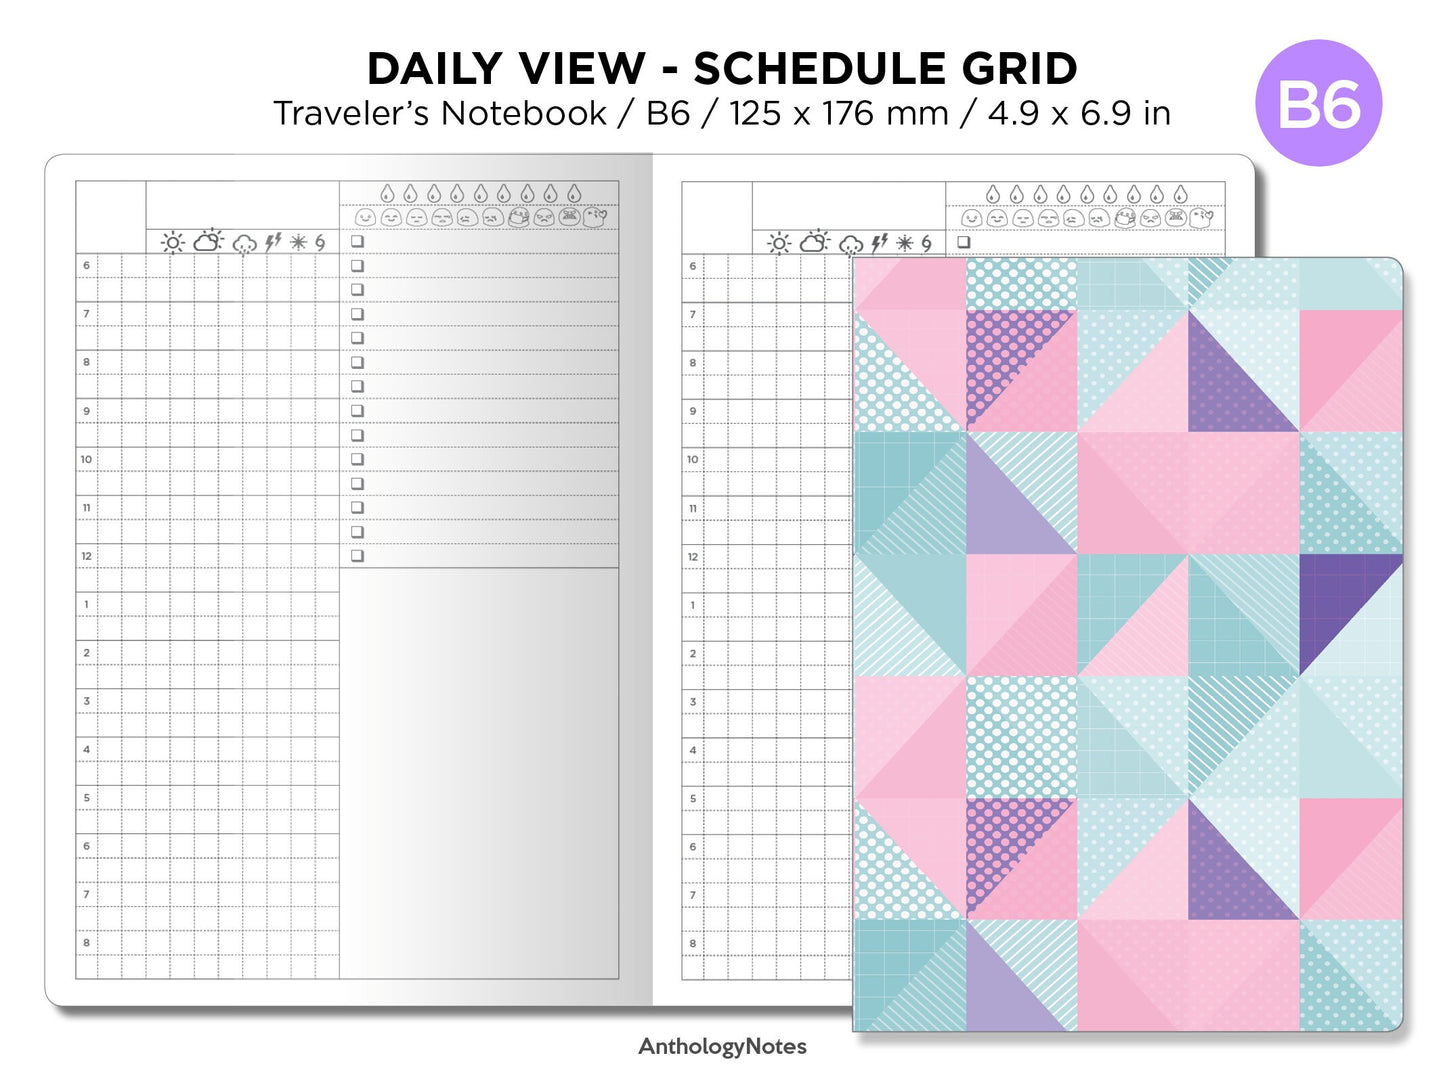 B6 DAILY Traveler's Notebook Printable Insert Schedule  Do1P Grid, Weather, Water, Mood Tracker